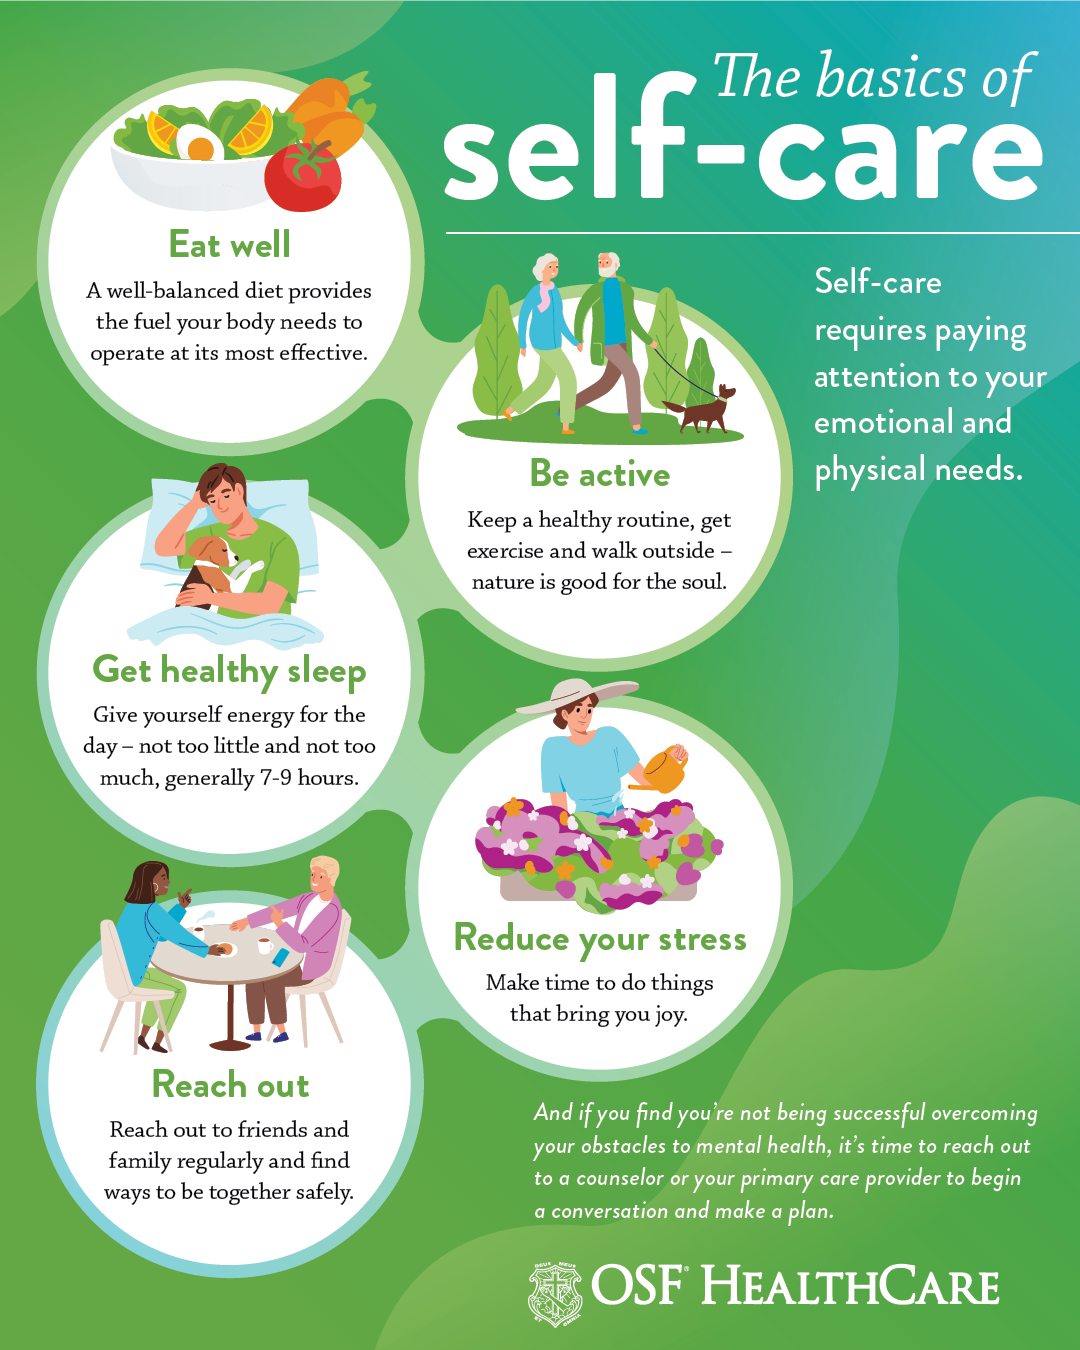 Physical health: Taking care of your body helps care for your mind